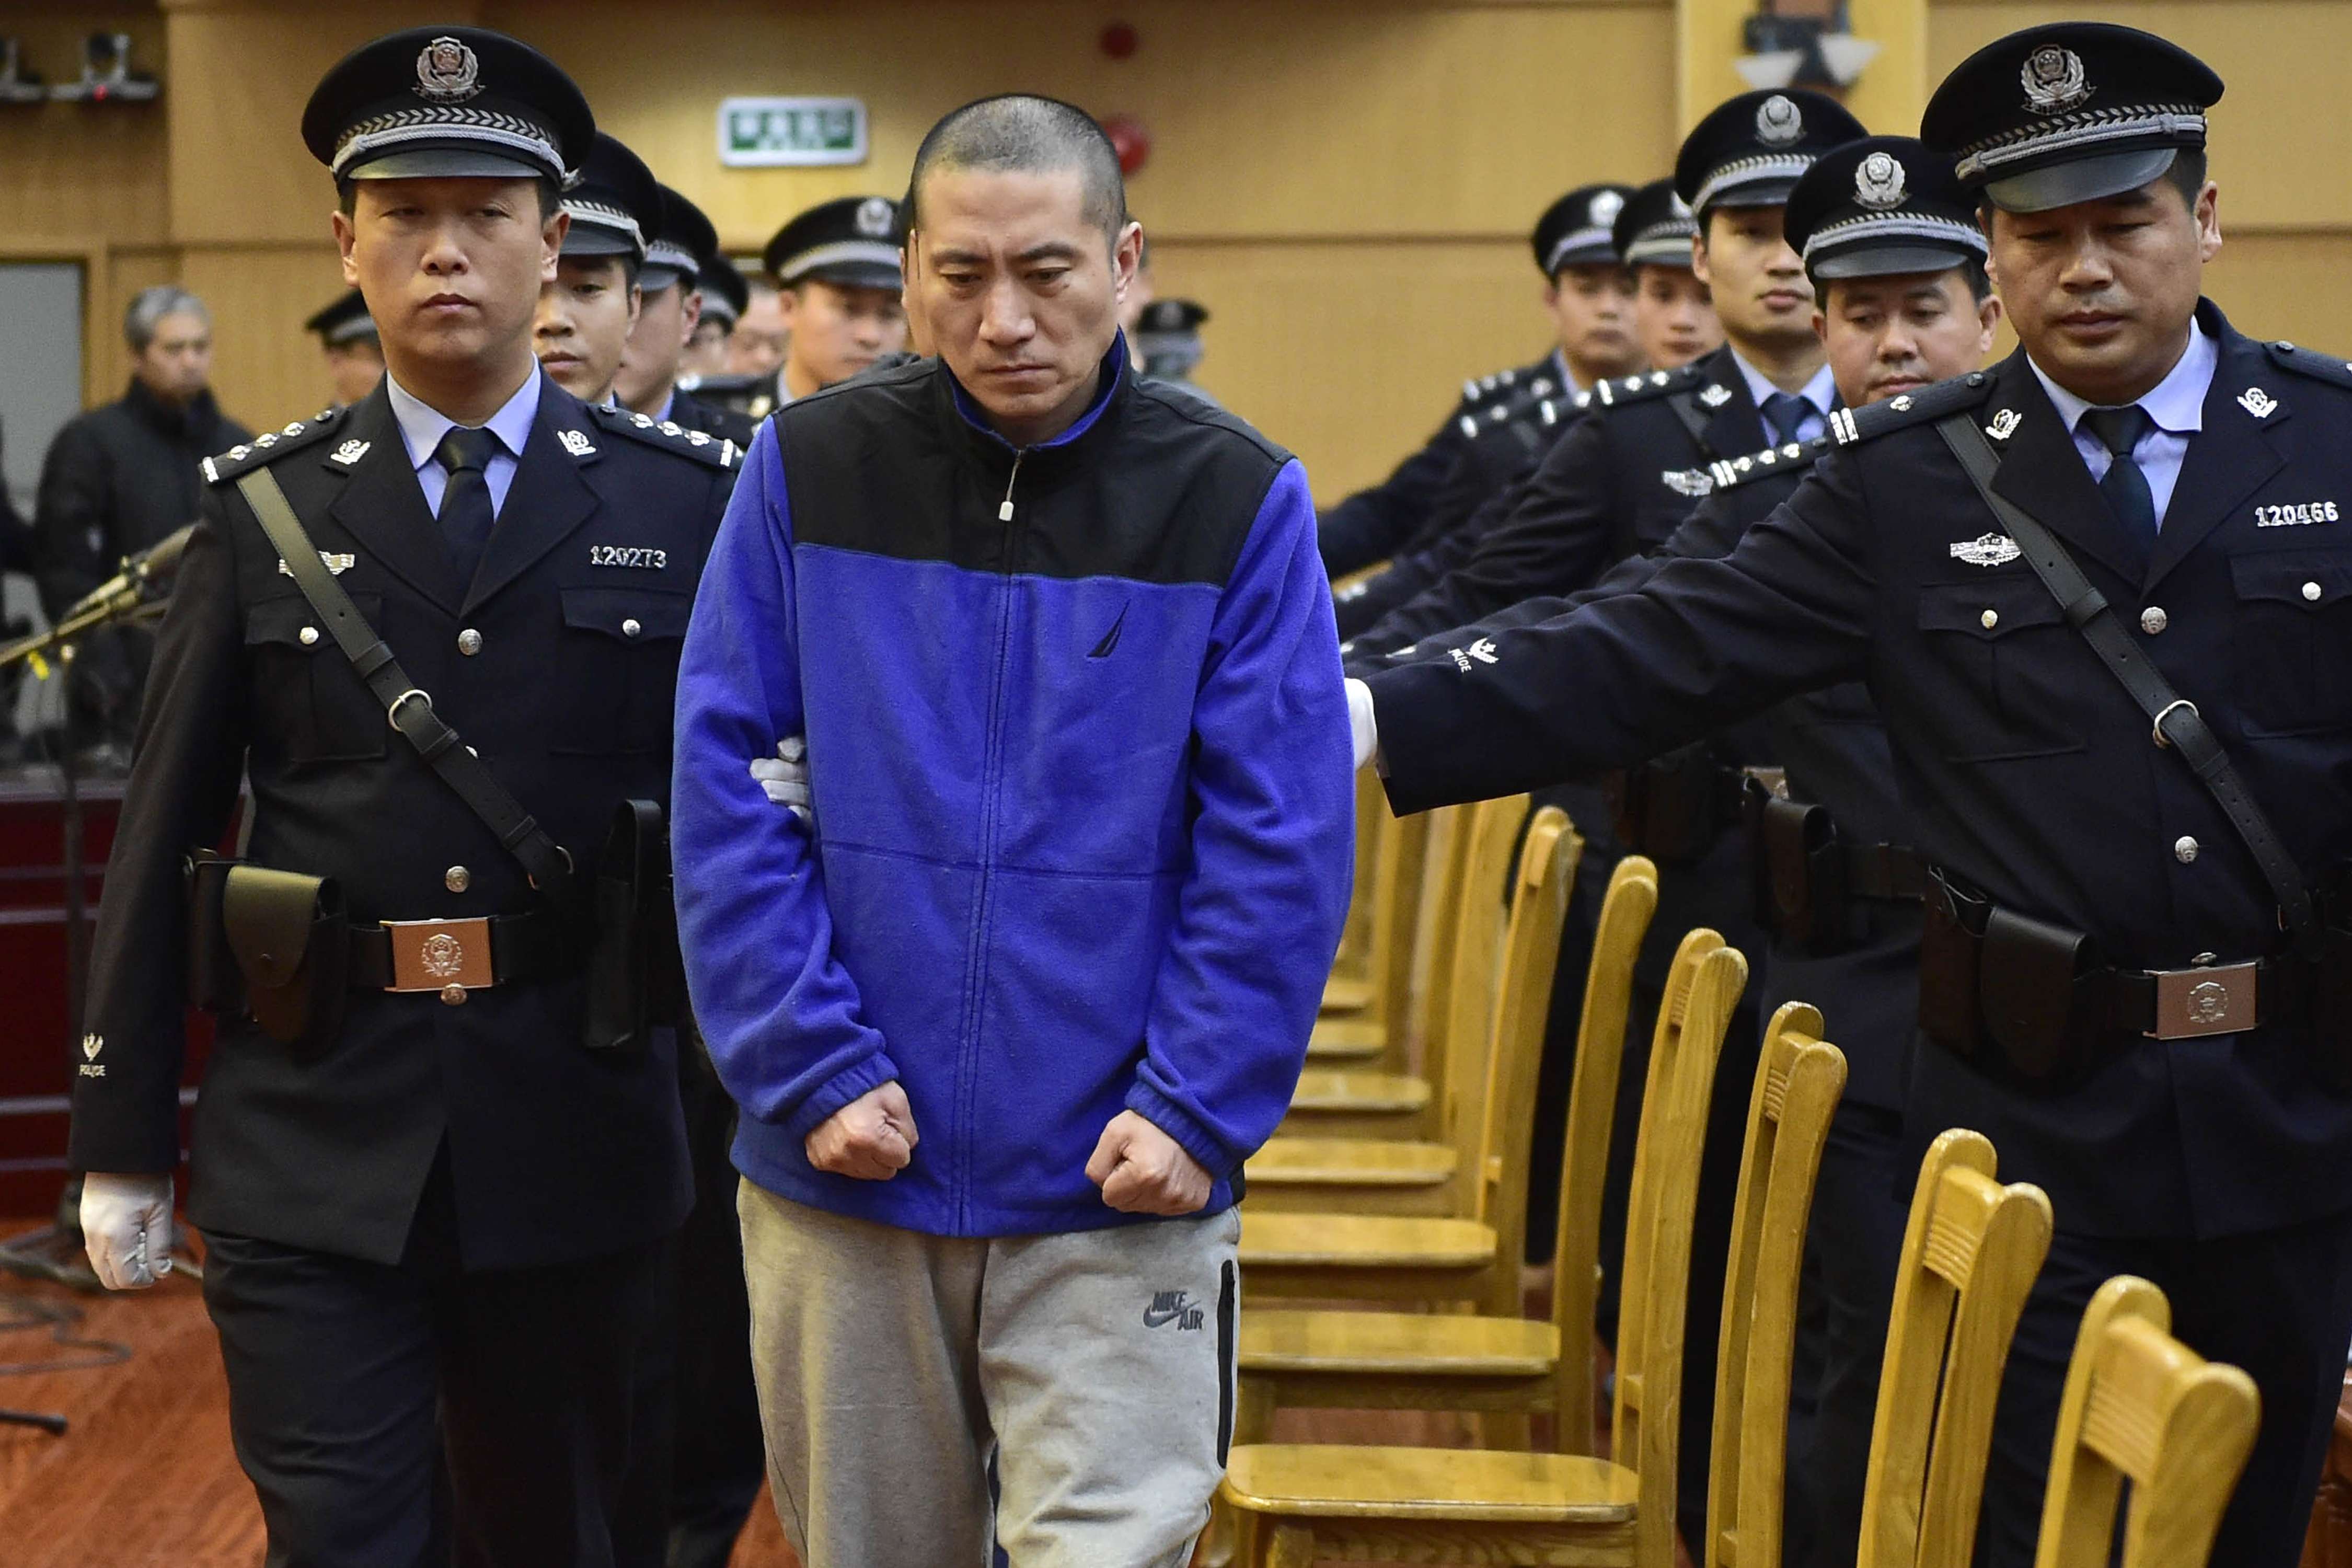 Yu Xuewei (centre), chairman of Ruihai International Logistics, is led into court by police officers at the start of his trial in Tianjin on Wednesday. Photo: Xinhua